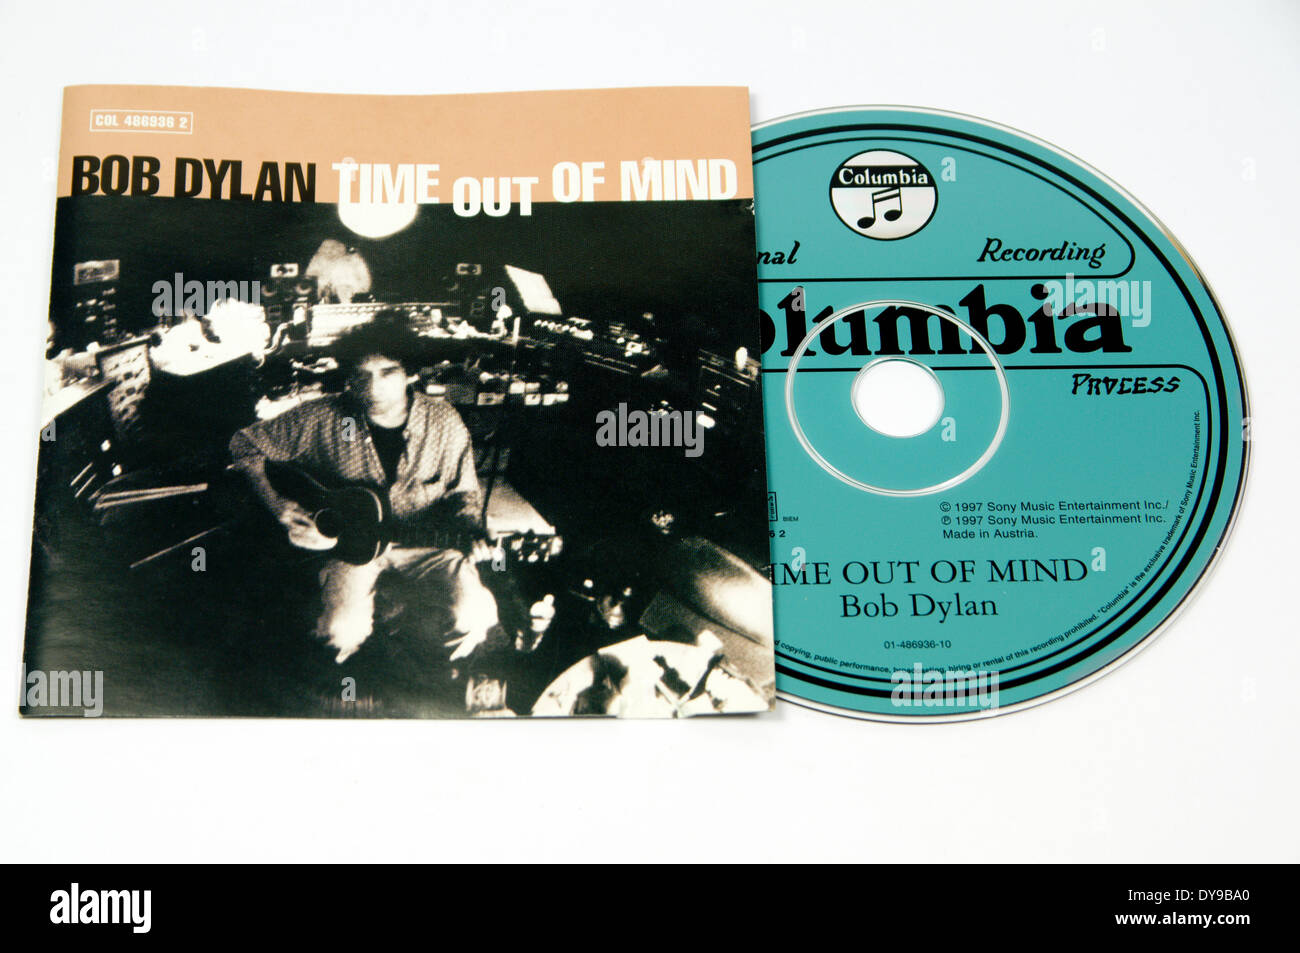 Bob Dylan Time Out of Mind album. Stock Photo